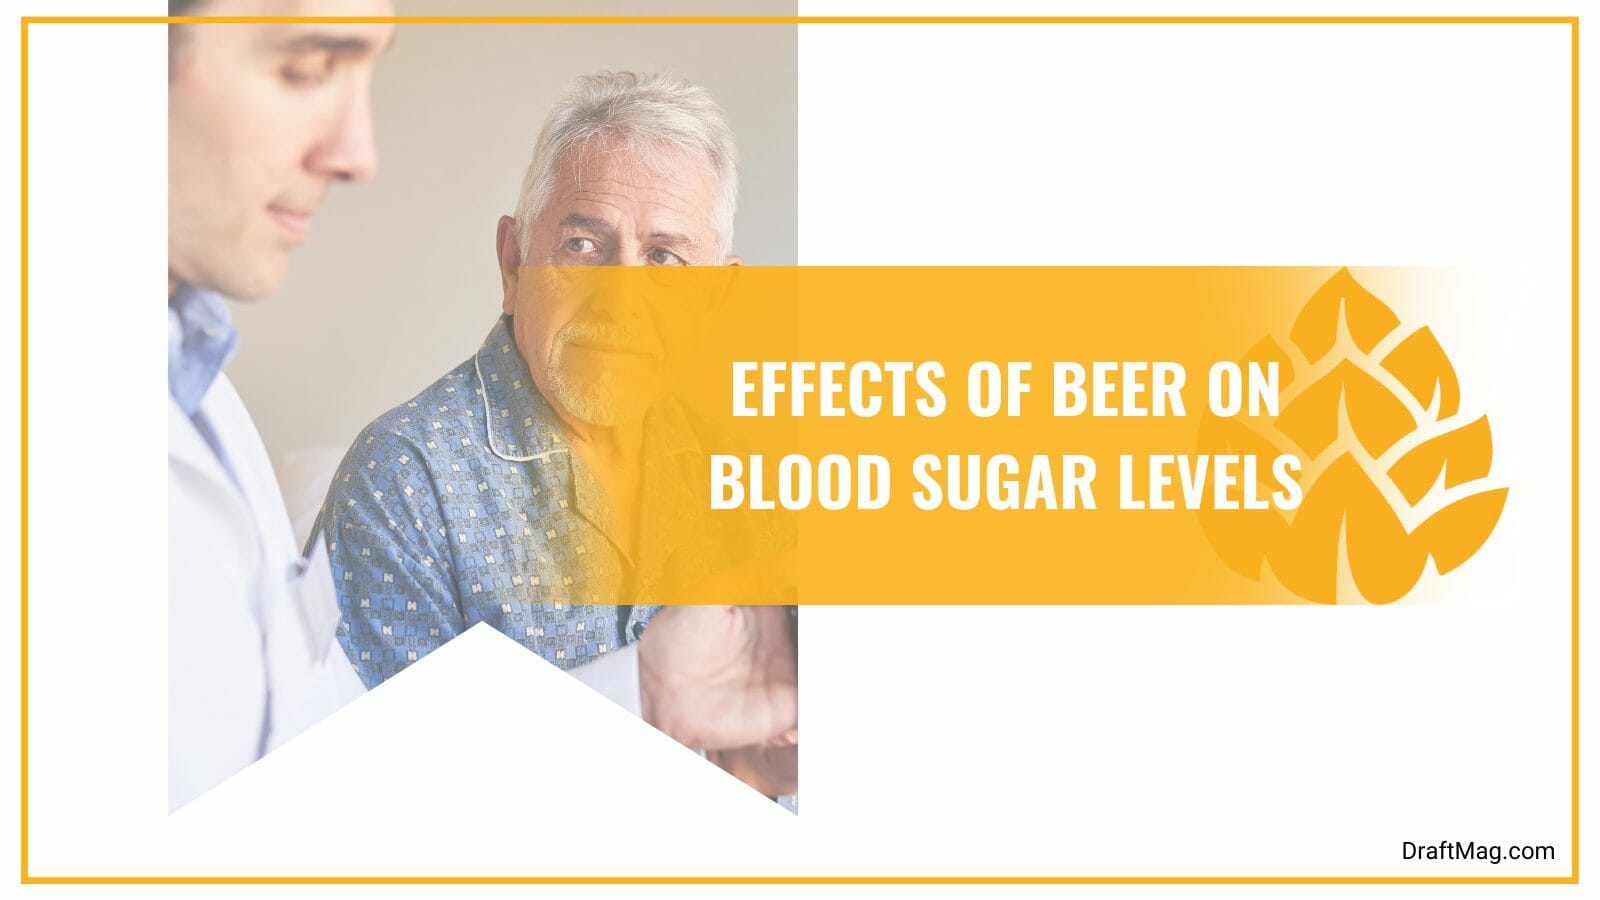 Effects of beer on blood sugar